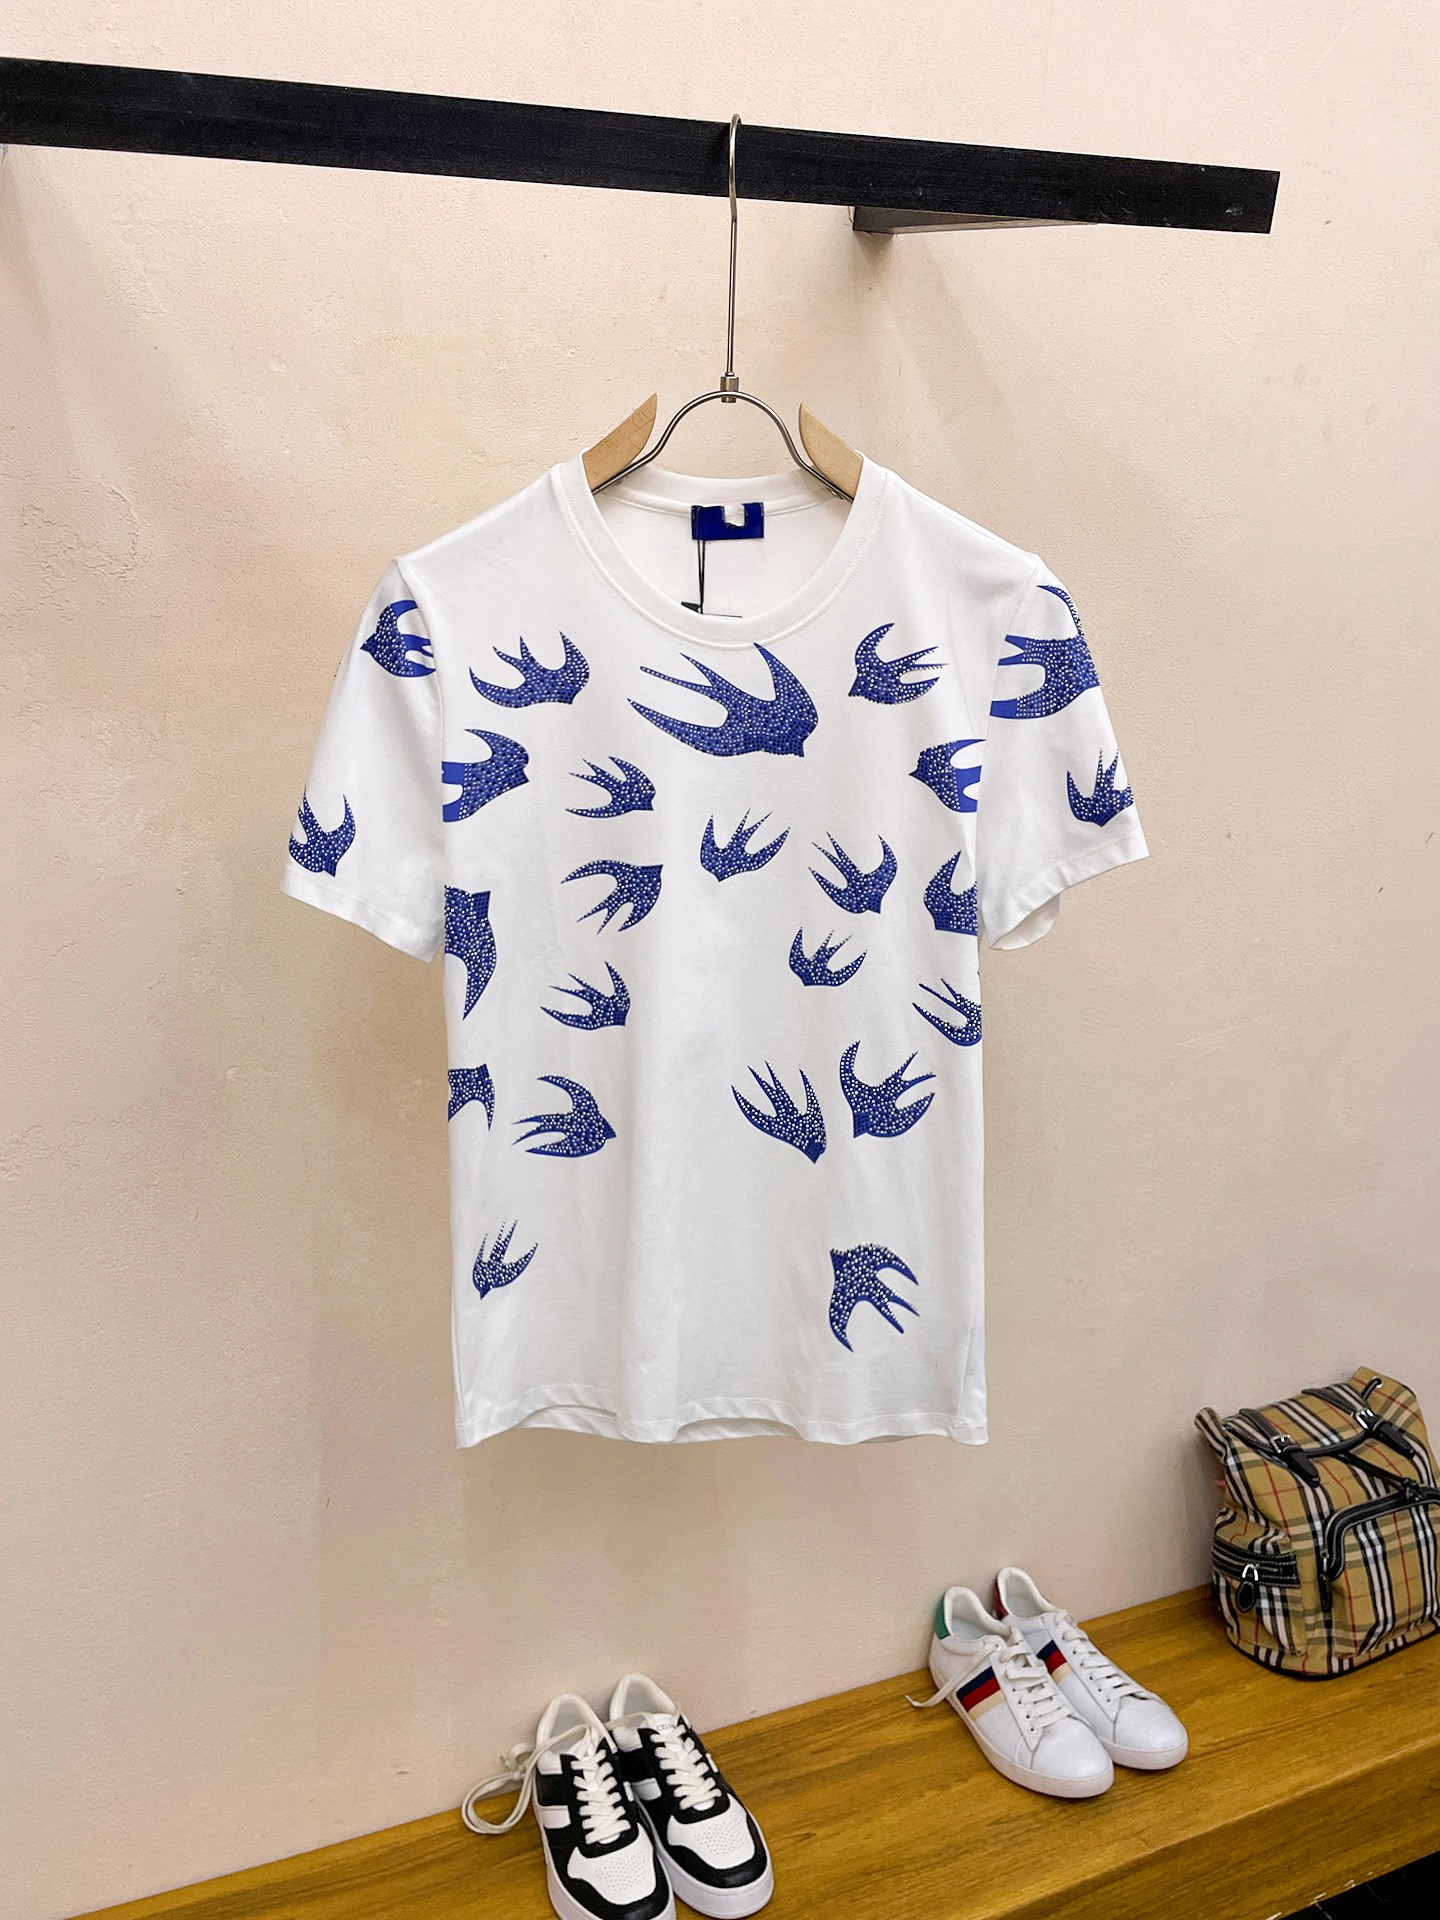 Chrome Hearts Clothing T-Shirt Men Cotton Mercerized Spring/Summer Collection Fashion Short Sleeve